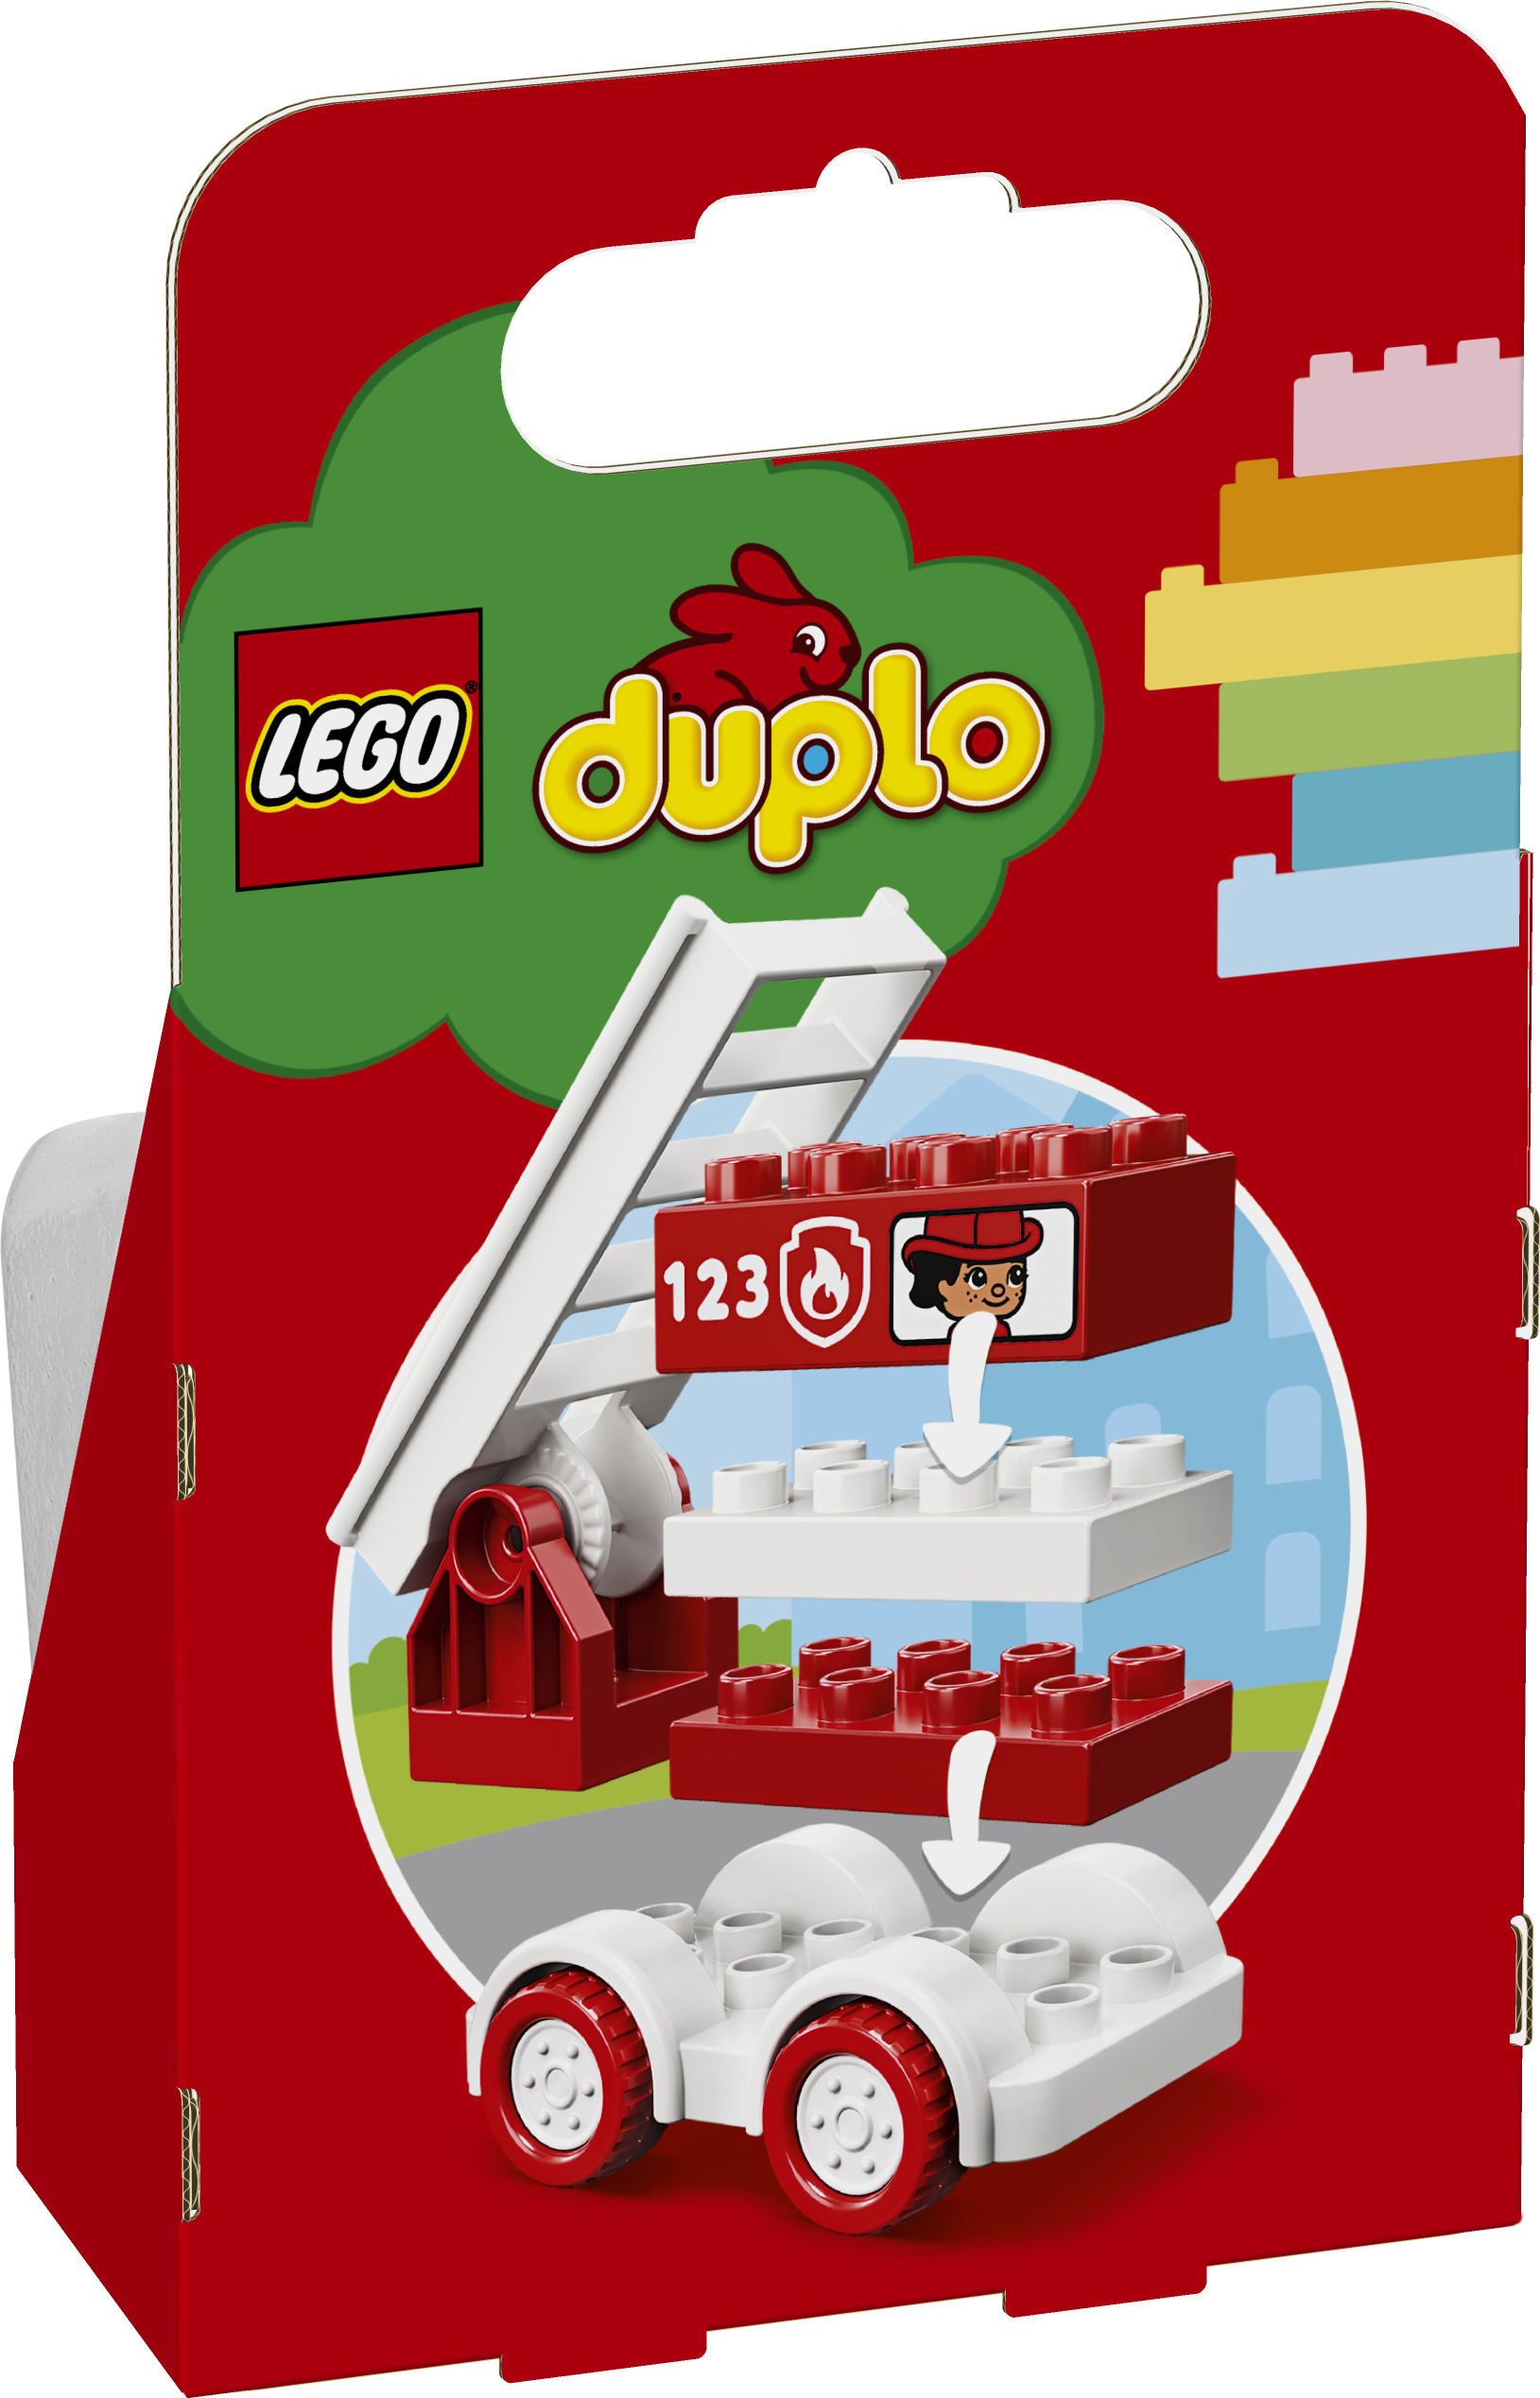 LEGO DUPLO My First Fire Truck 10917 Educational Building Toy for Toddlers (6 Pieces) - image 5 of 6